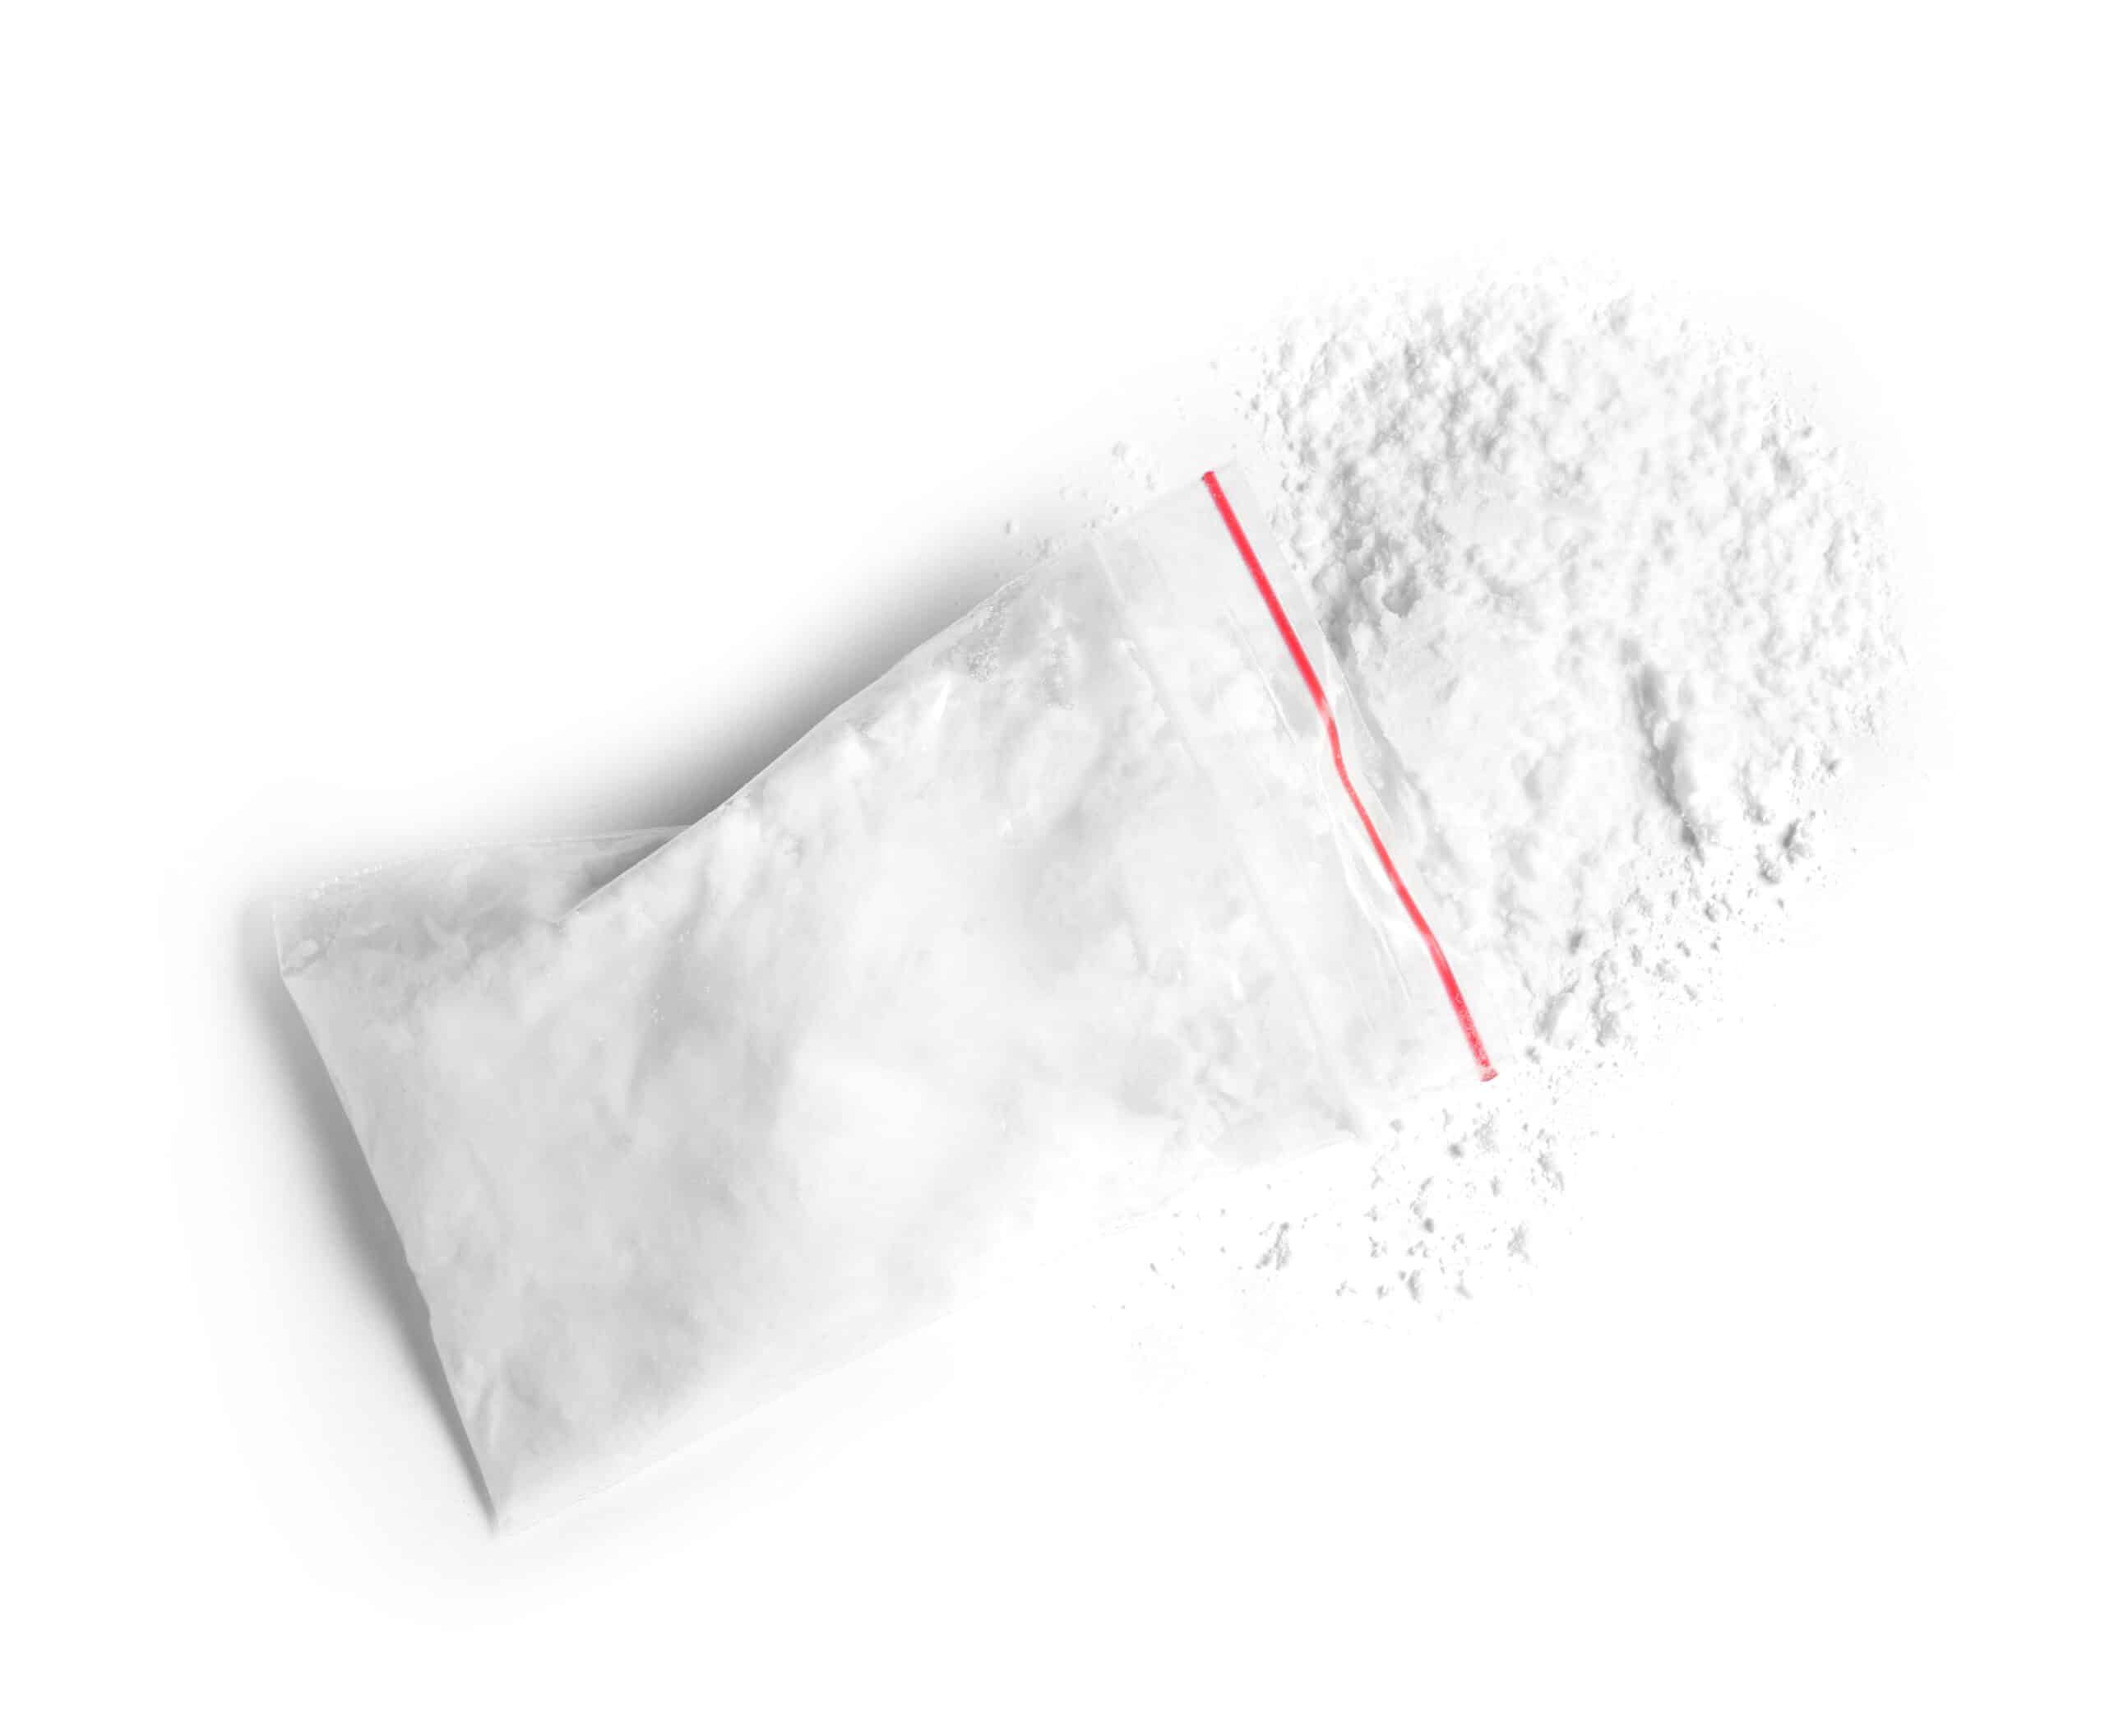 Cocaine In Plastic Bag On White Background Top View